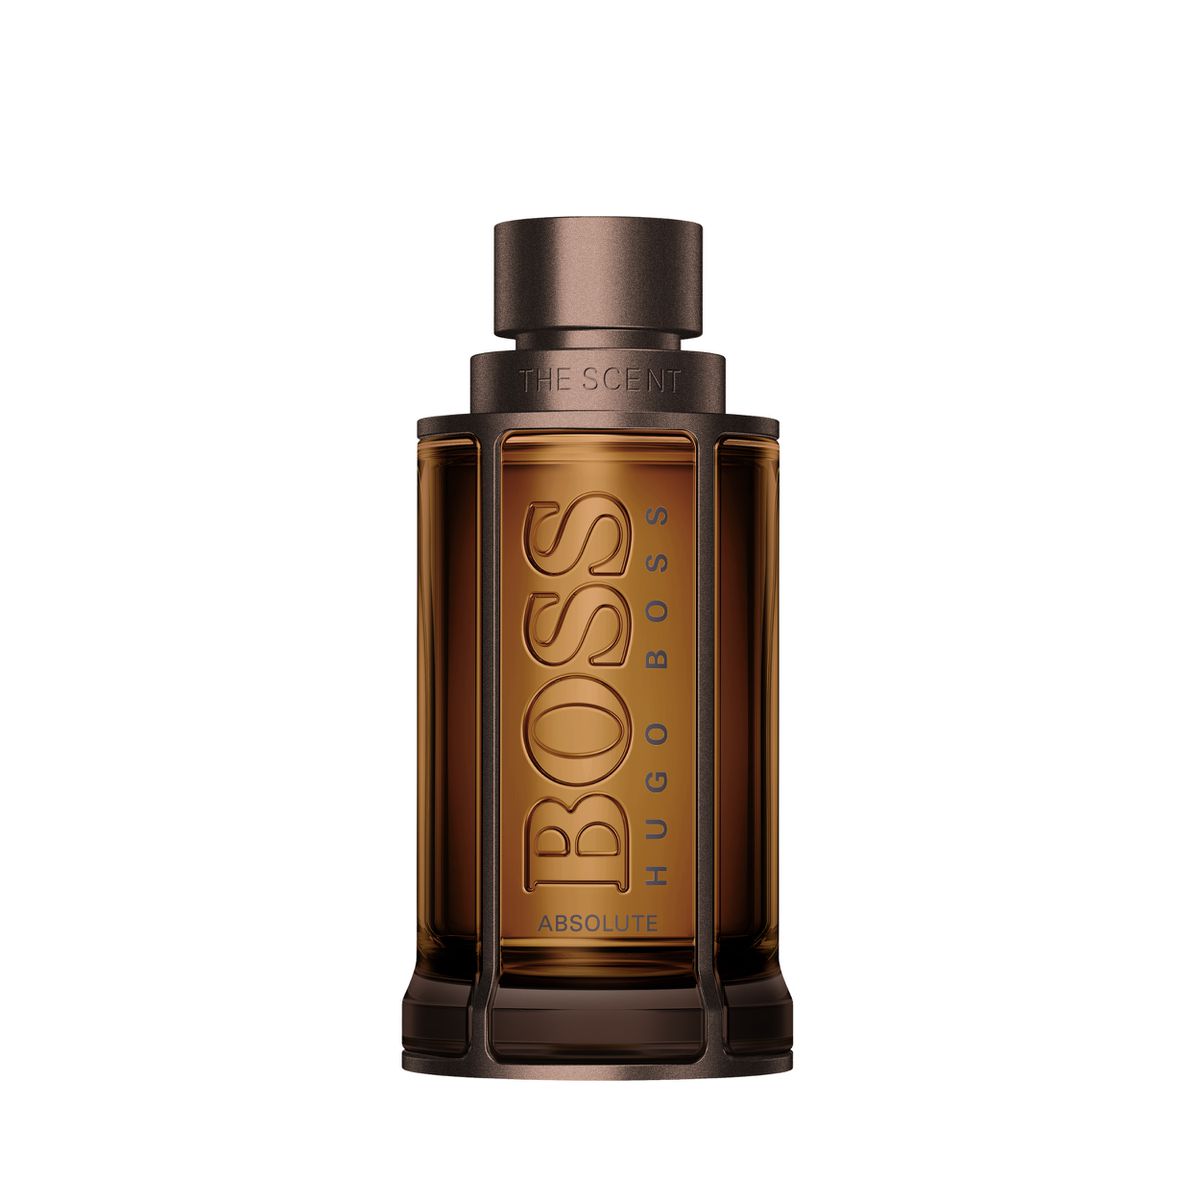 HUGO BOSS THE SCENT ABSOLUTE FOR HIM - 100ml